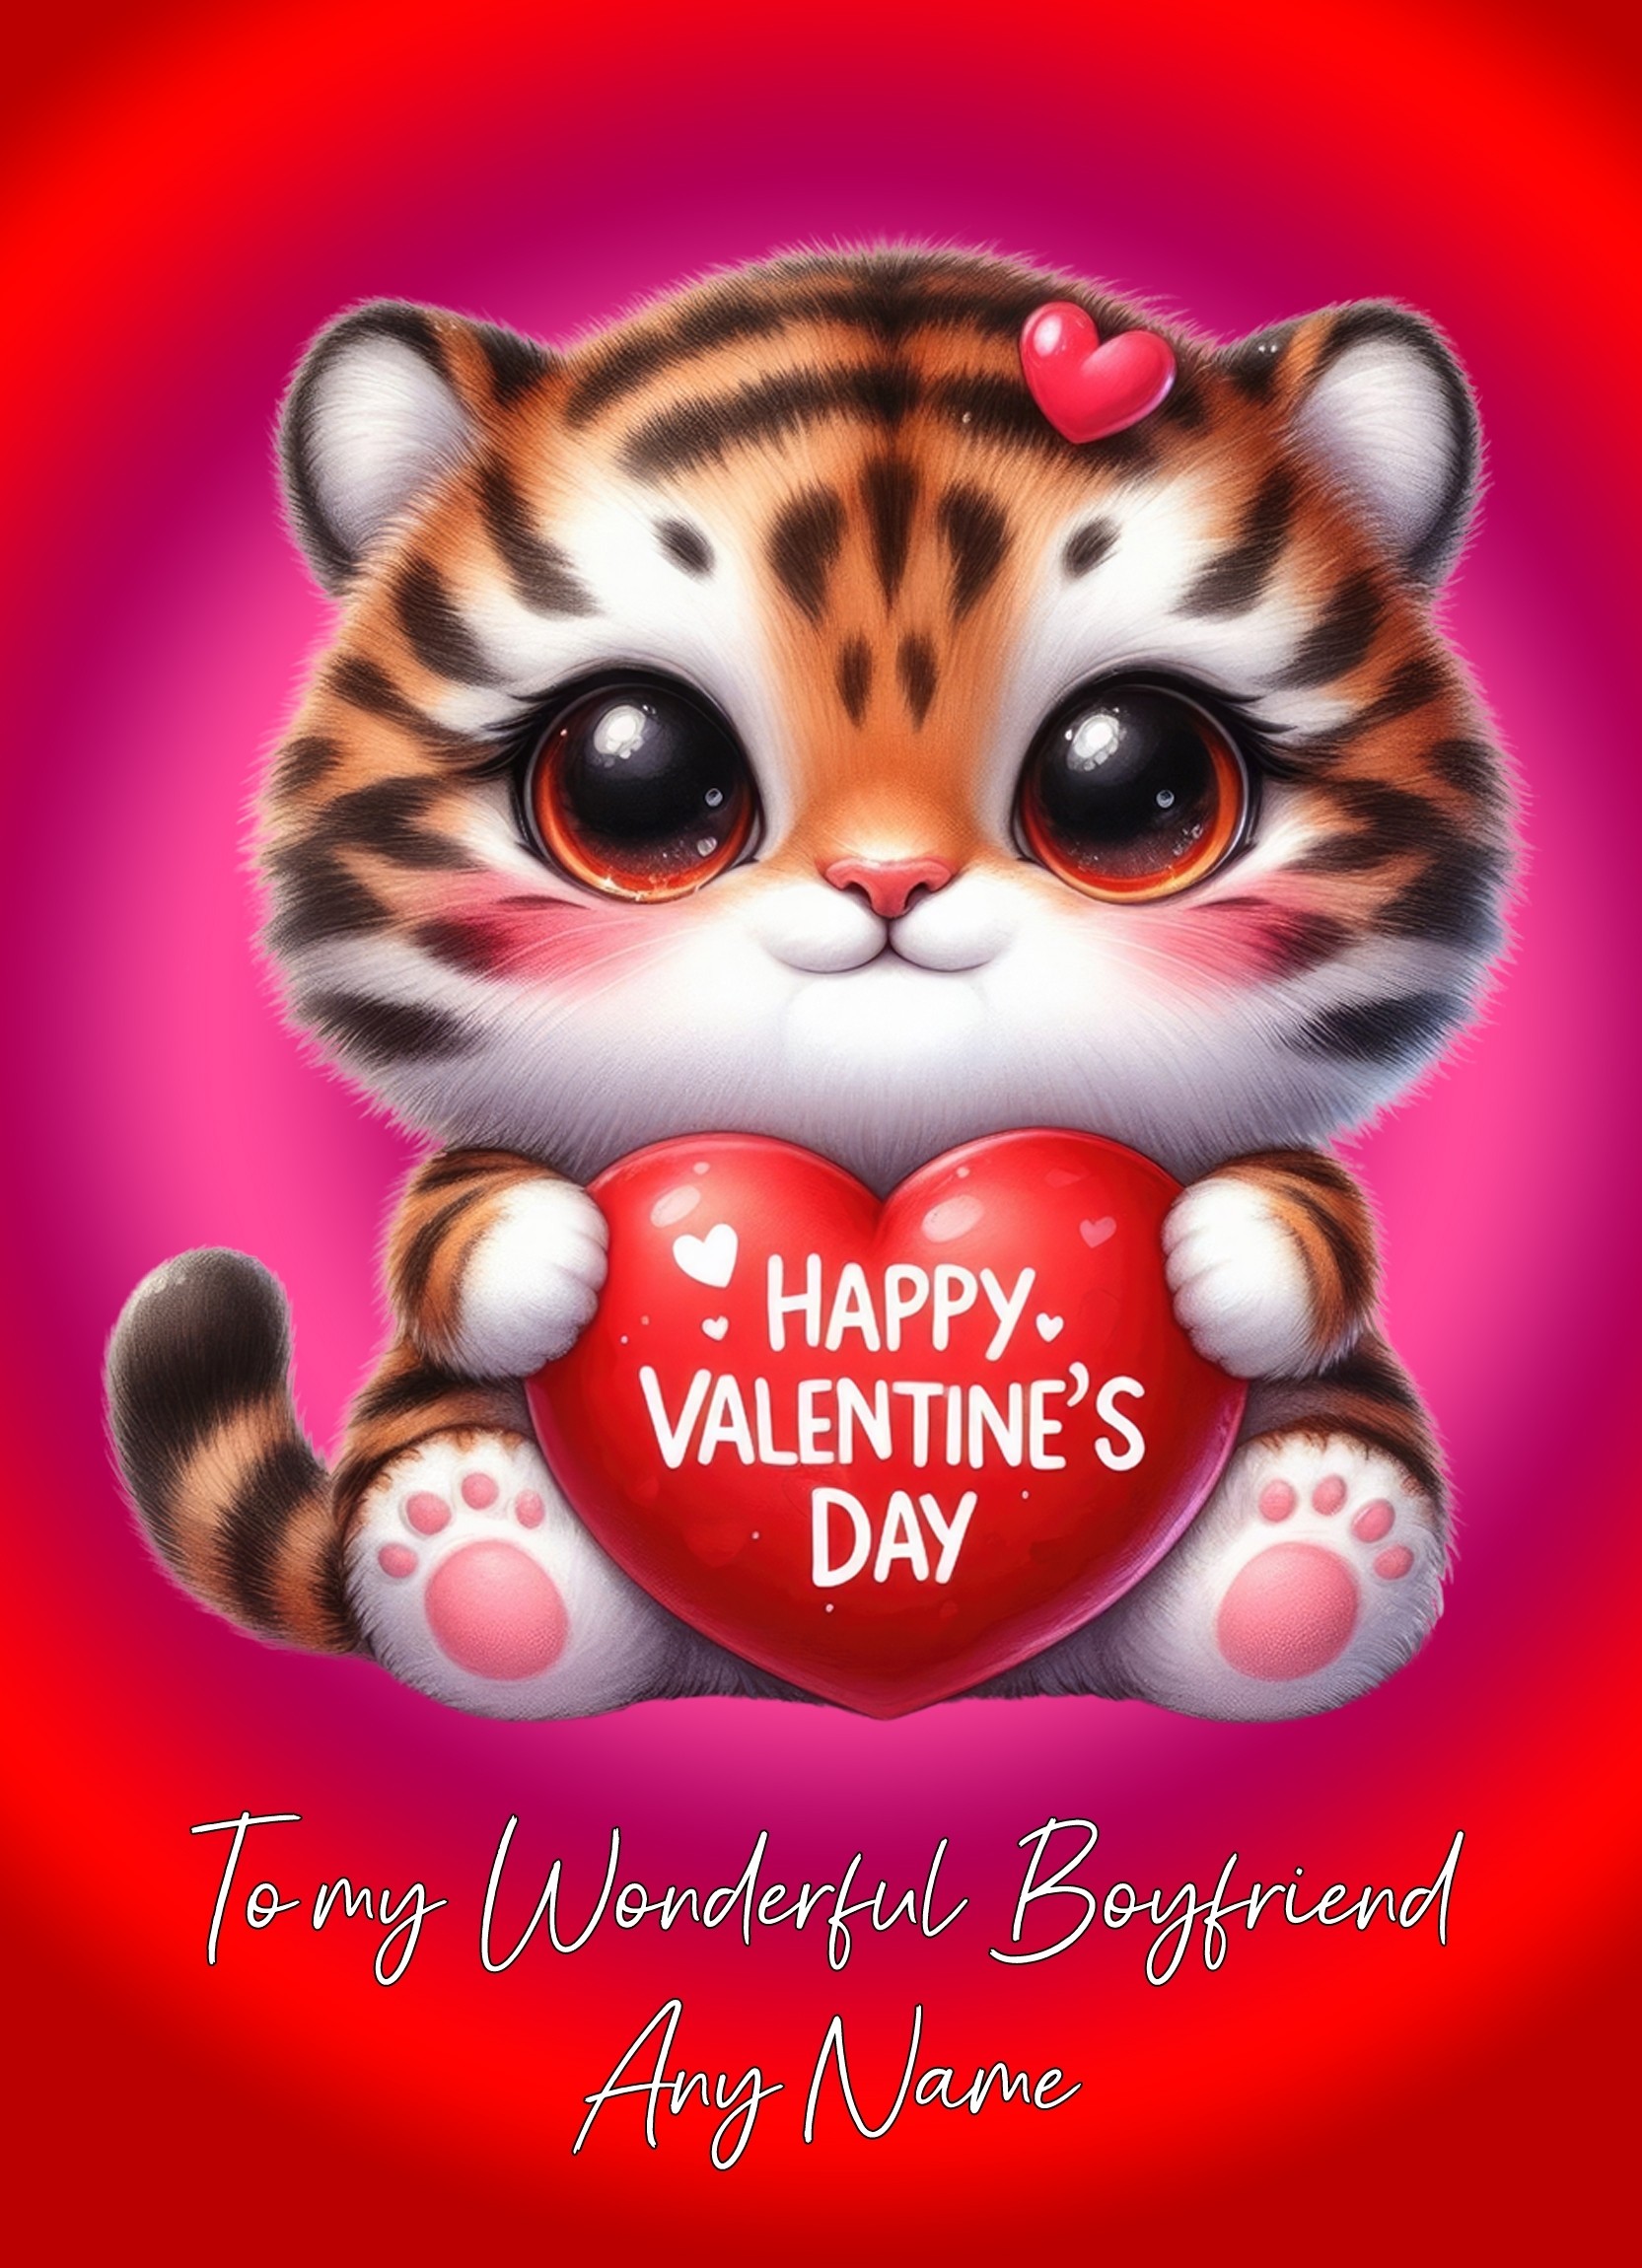 Personalised Valentines Day Card for Boyfriend (Tiger)